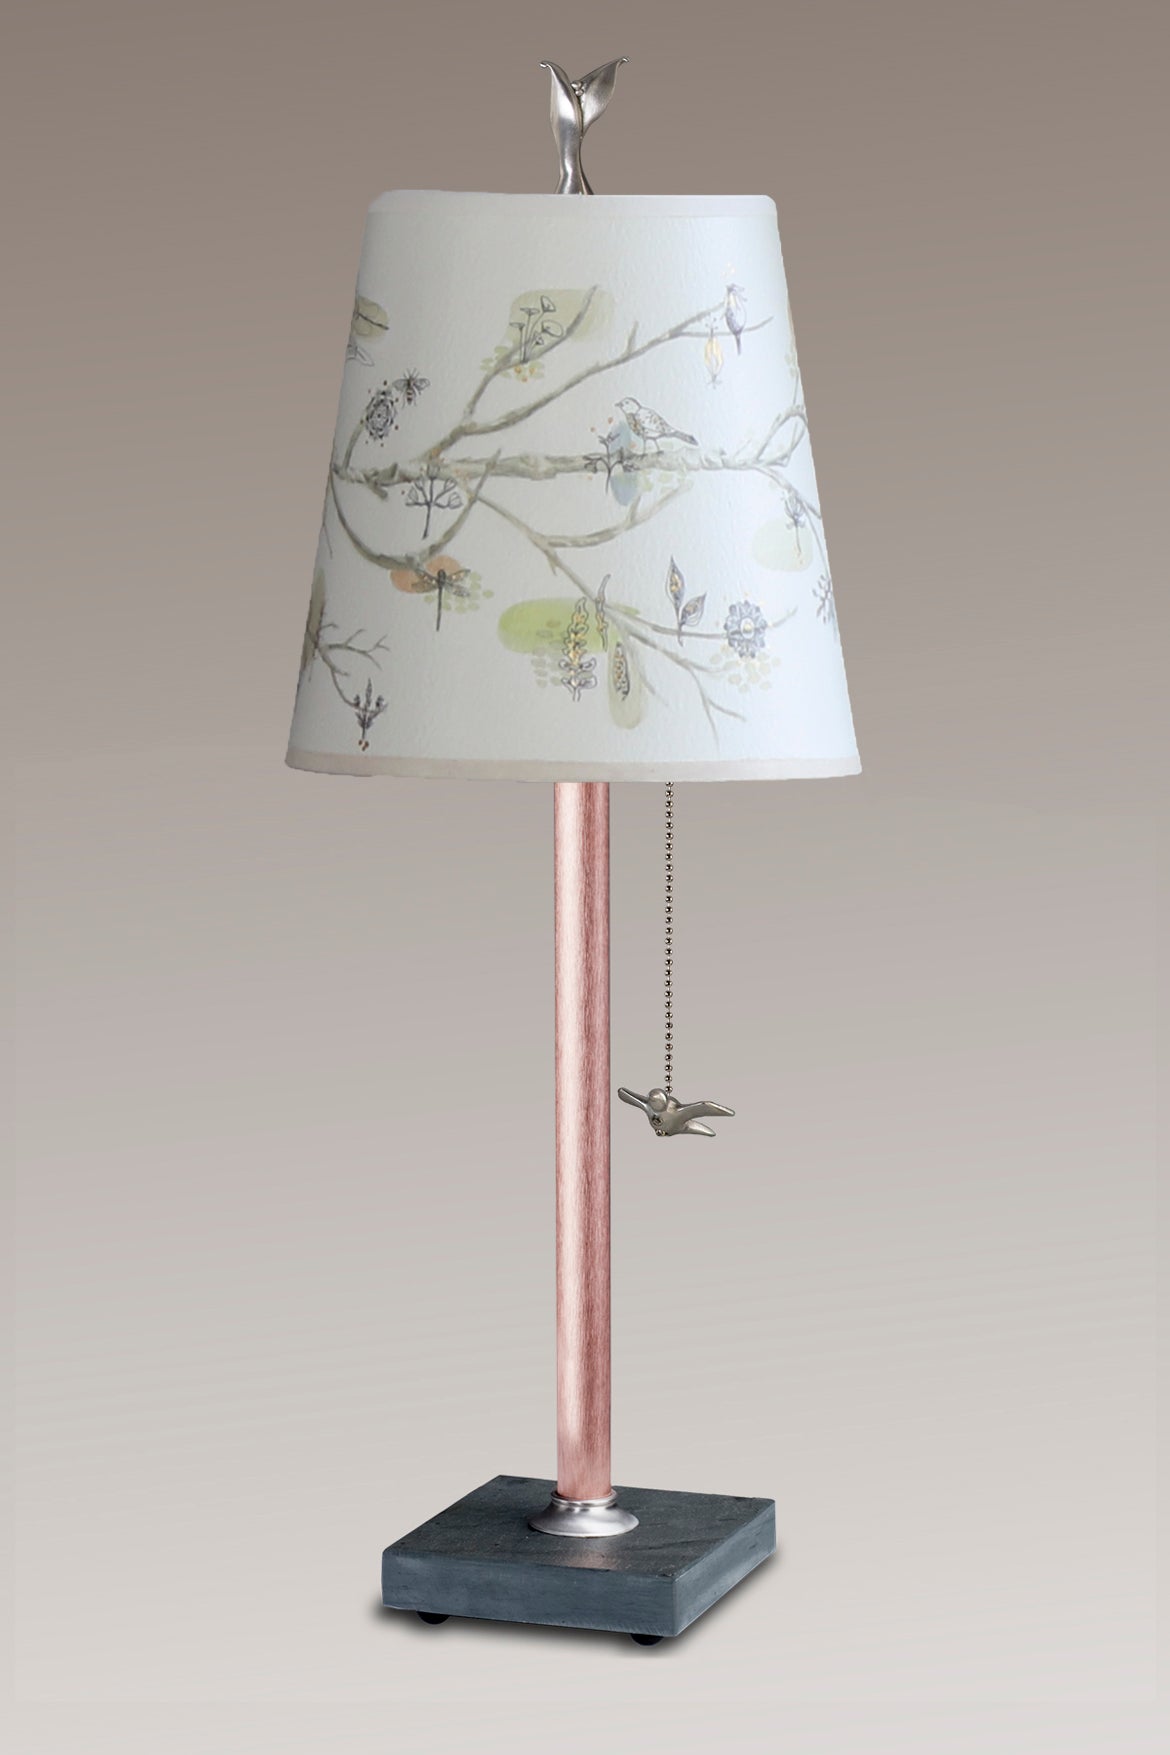 Janna Ugone &amp; Co Table Lamps Copper Table Lamp with Small Drum Shade in Artful Branch